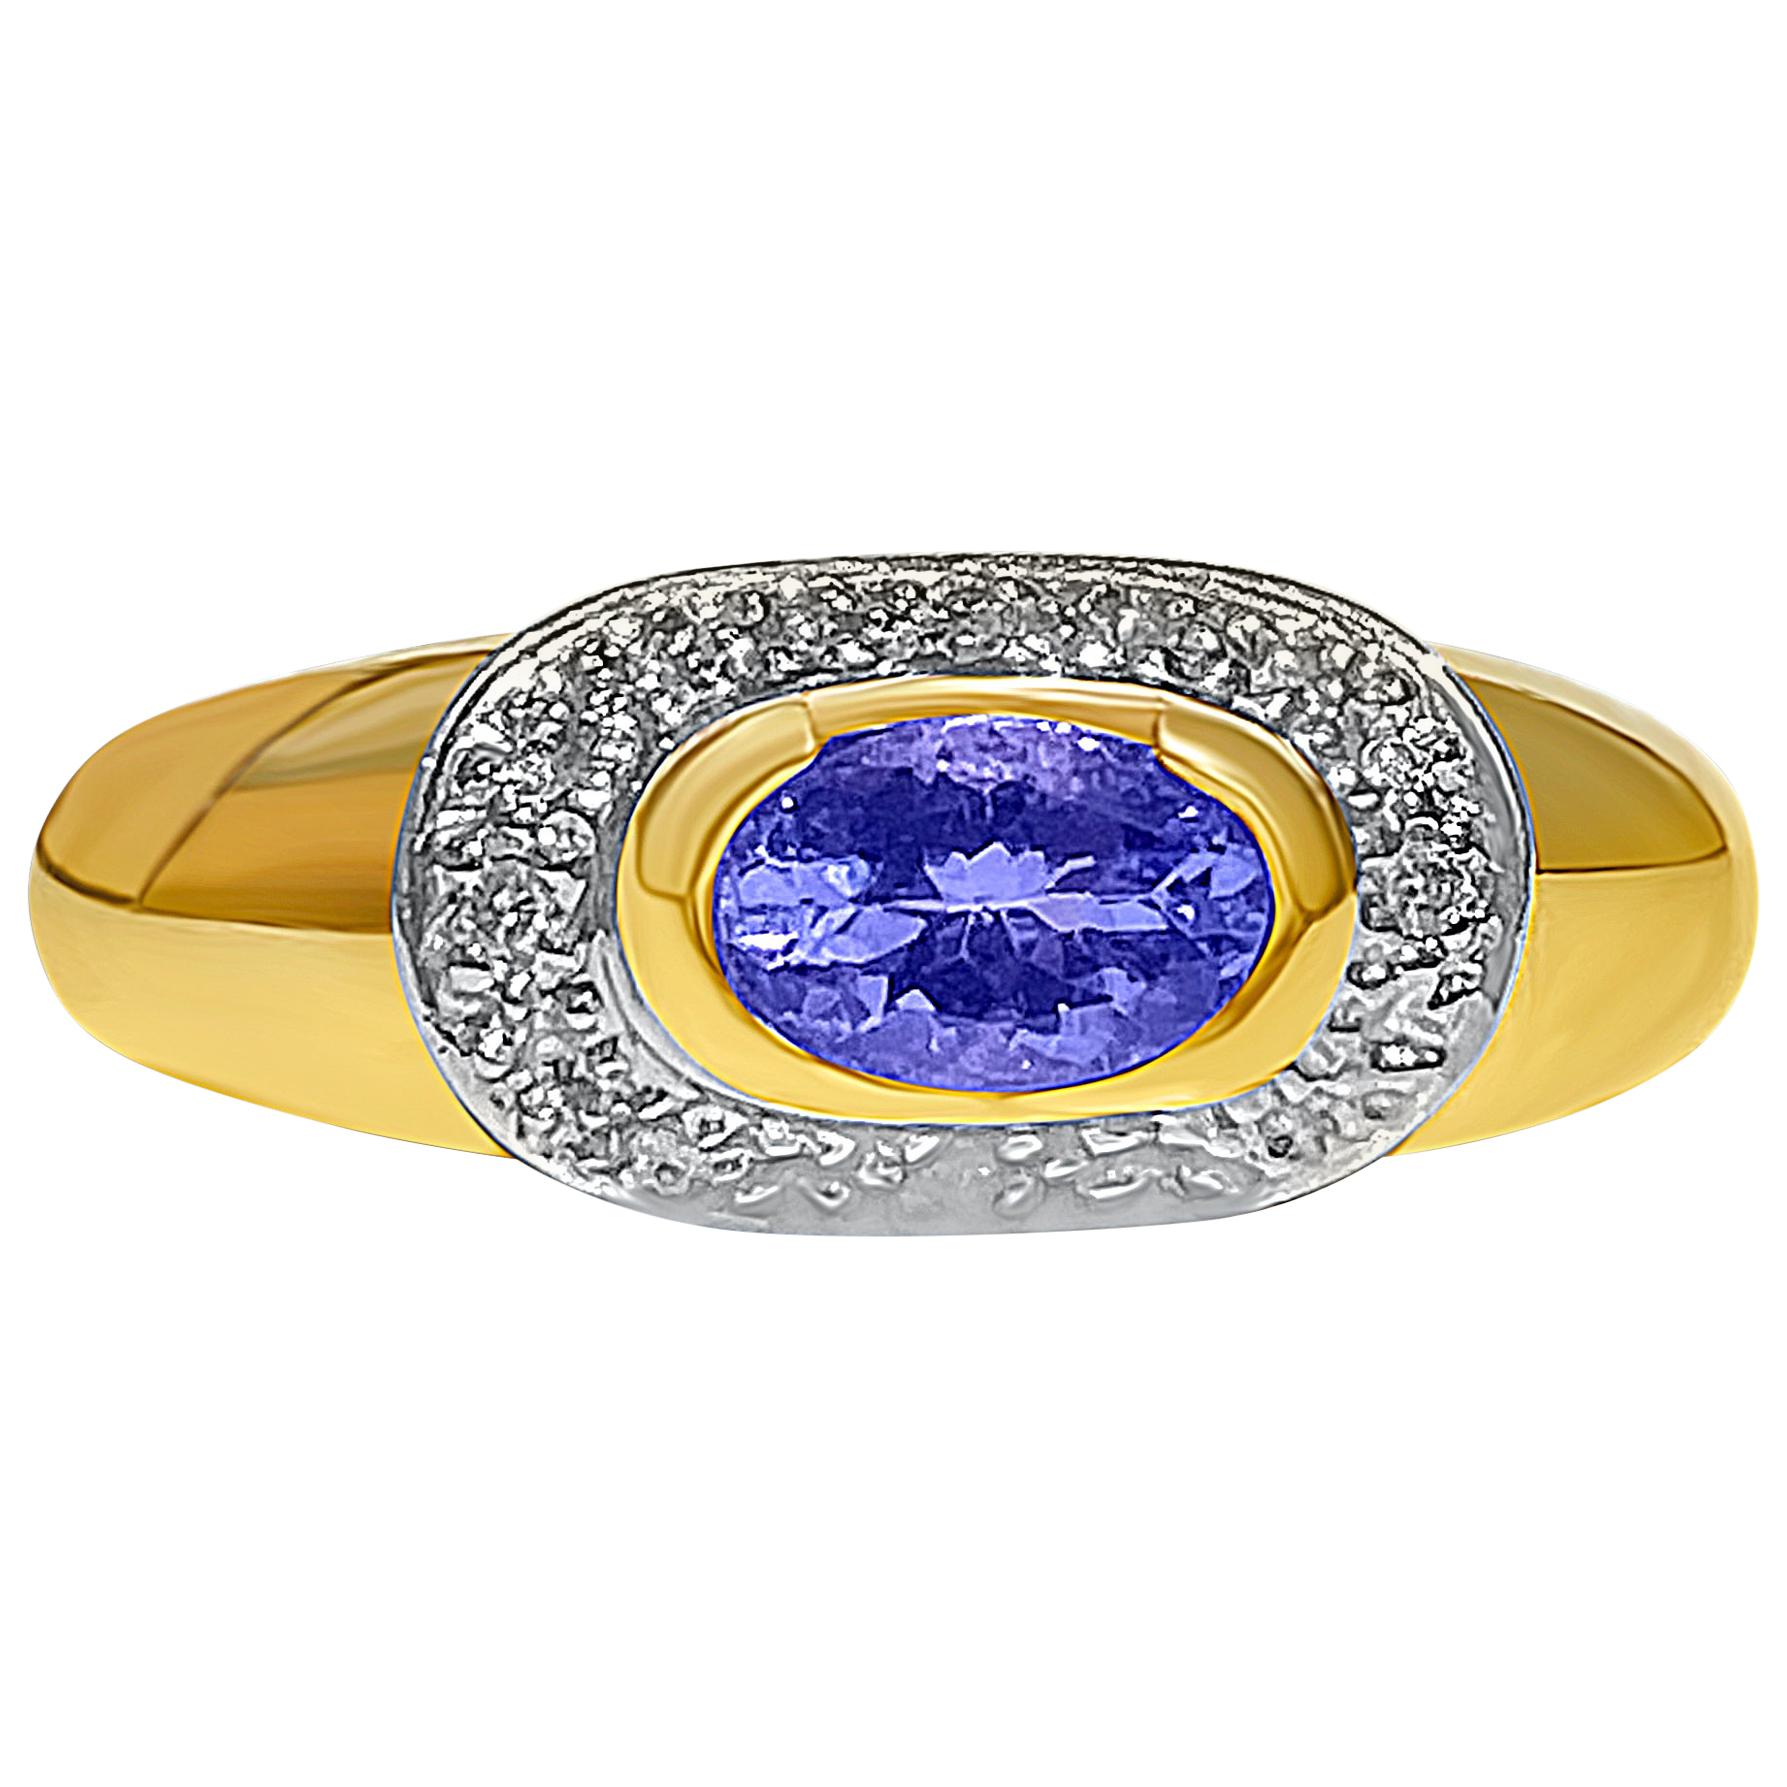 0.68 Carat Oval-Cut Tanzanite and 14 Karat Yellow Gold Engagement Ring For Sale